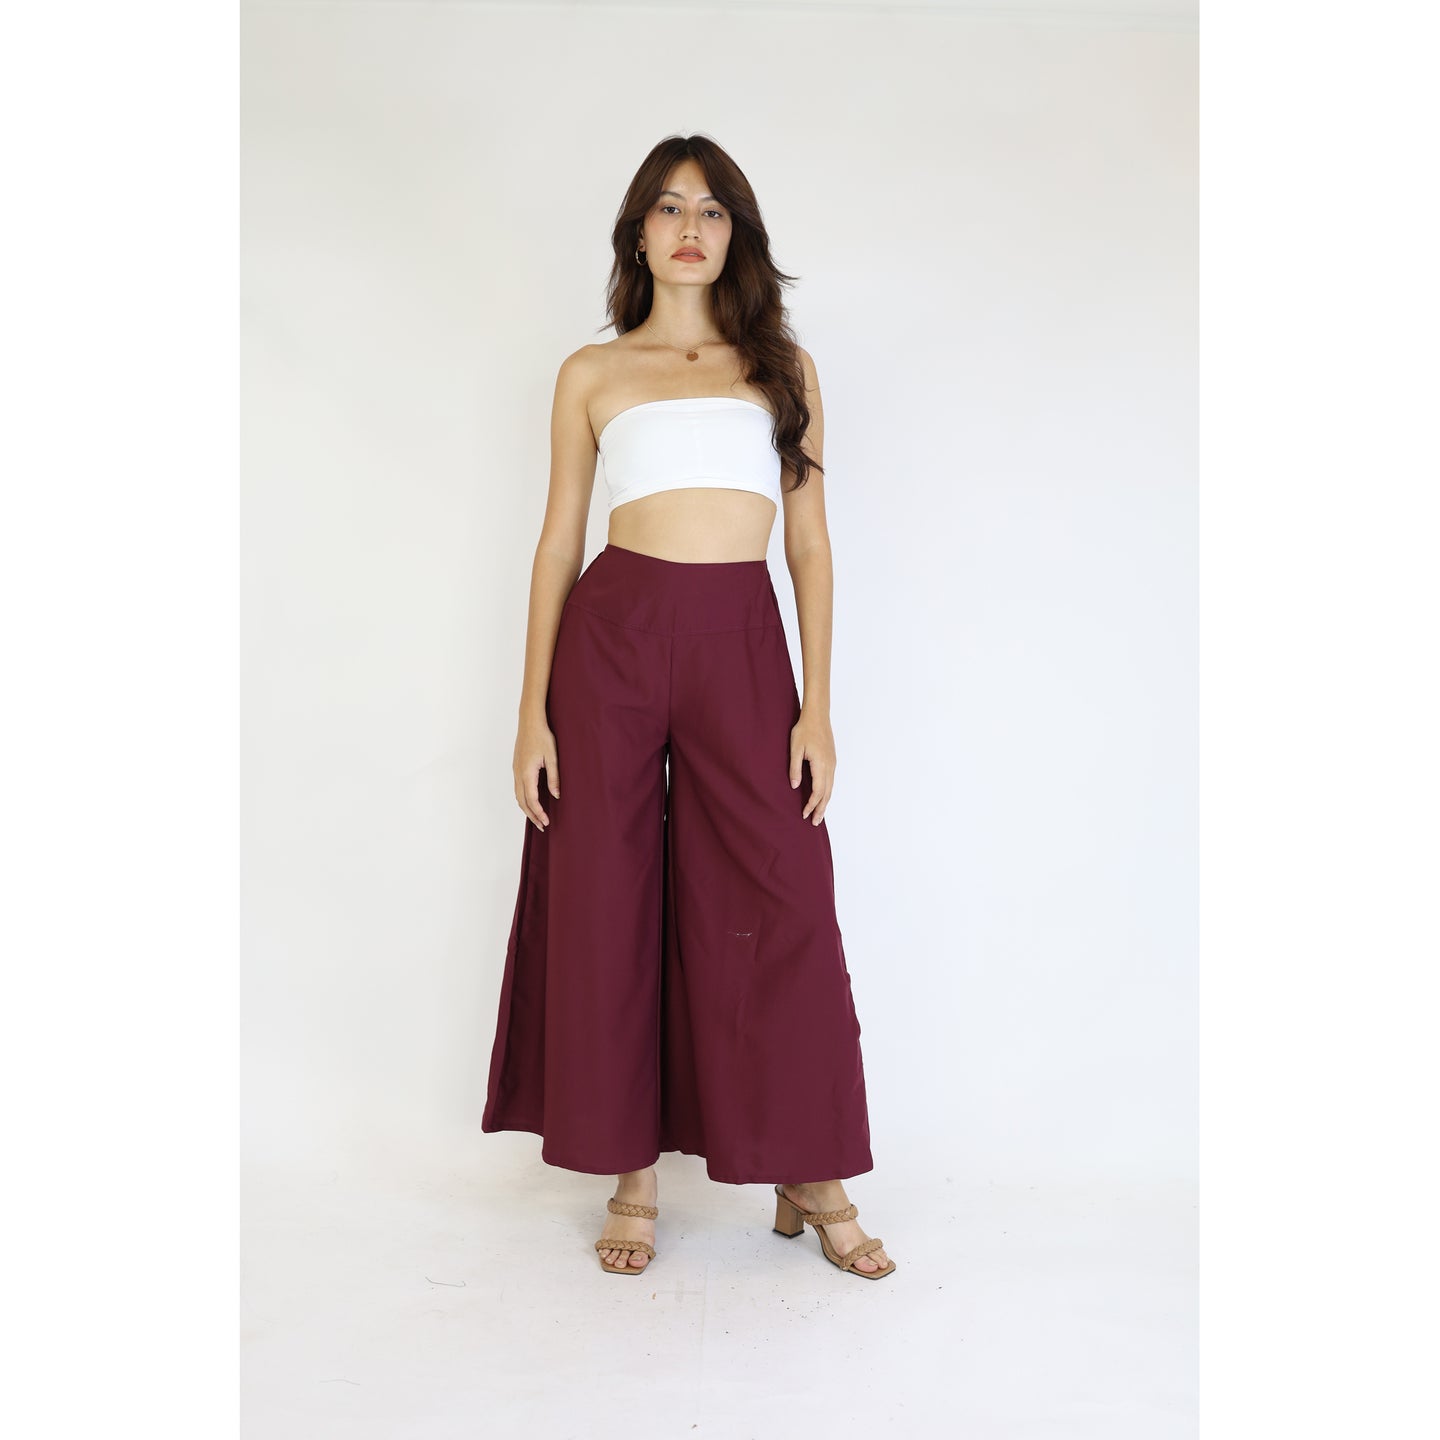 Solid Color Women's Palazzo Pants in Burgundy PP0304 020000 15